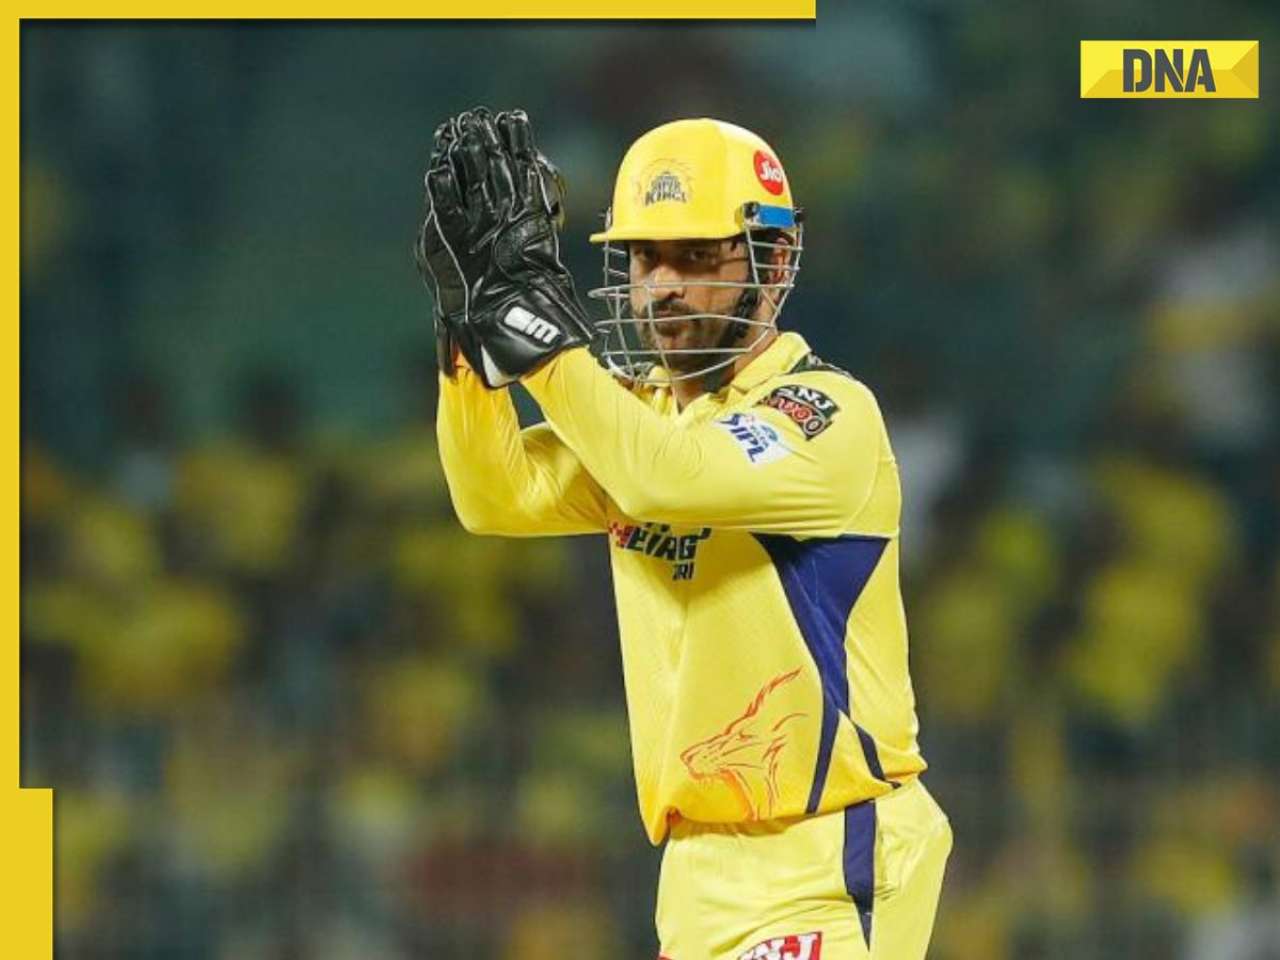 MS Dhoni to retire from IPL? CSK's viral 'stay back' post sparks social media storm